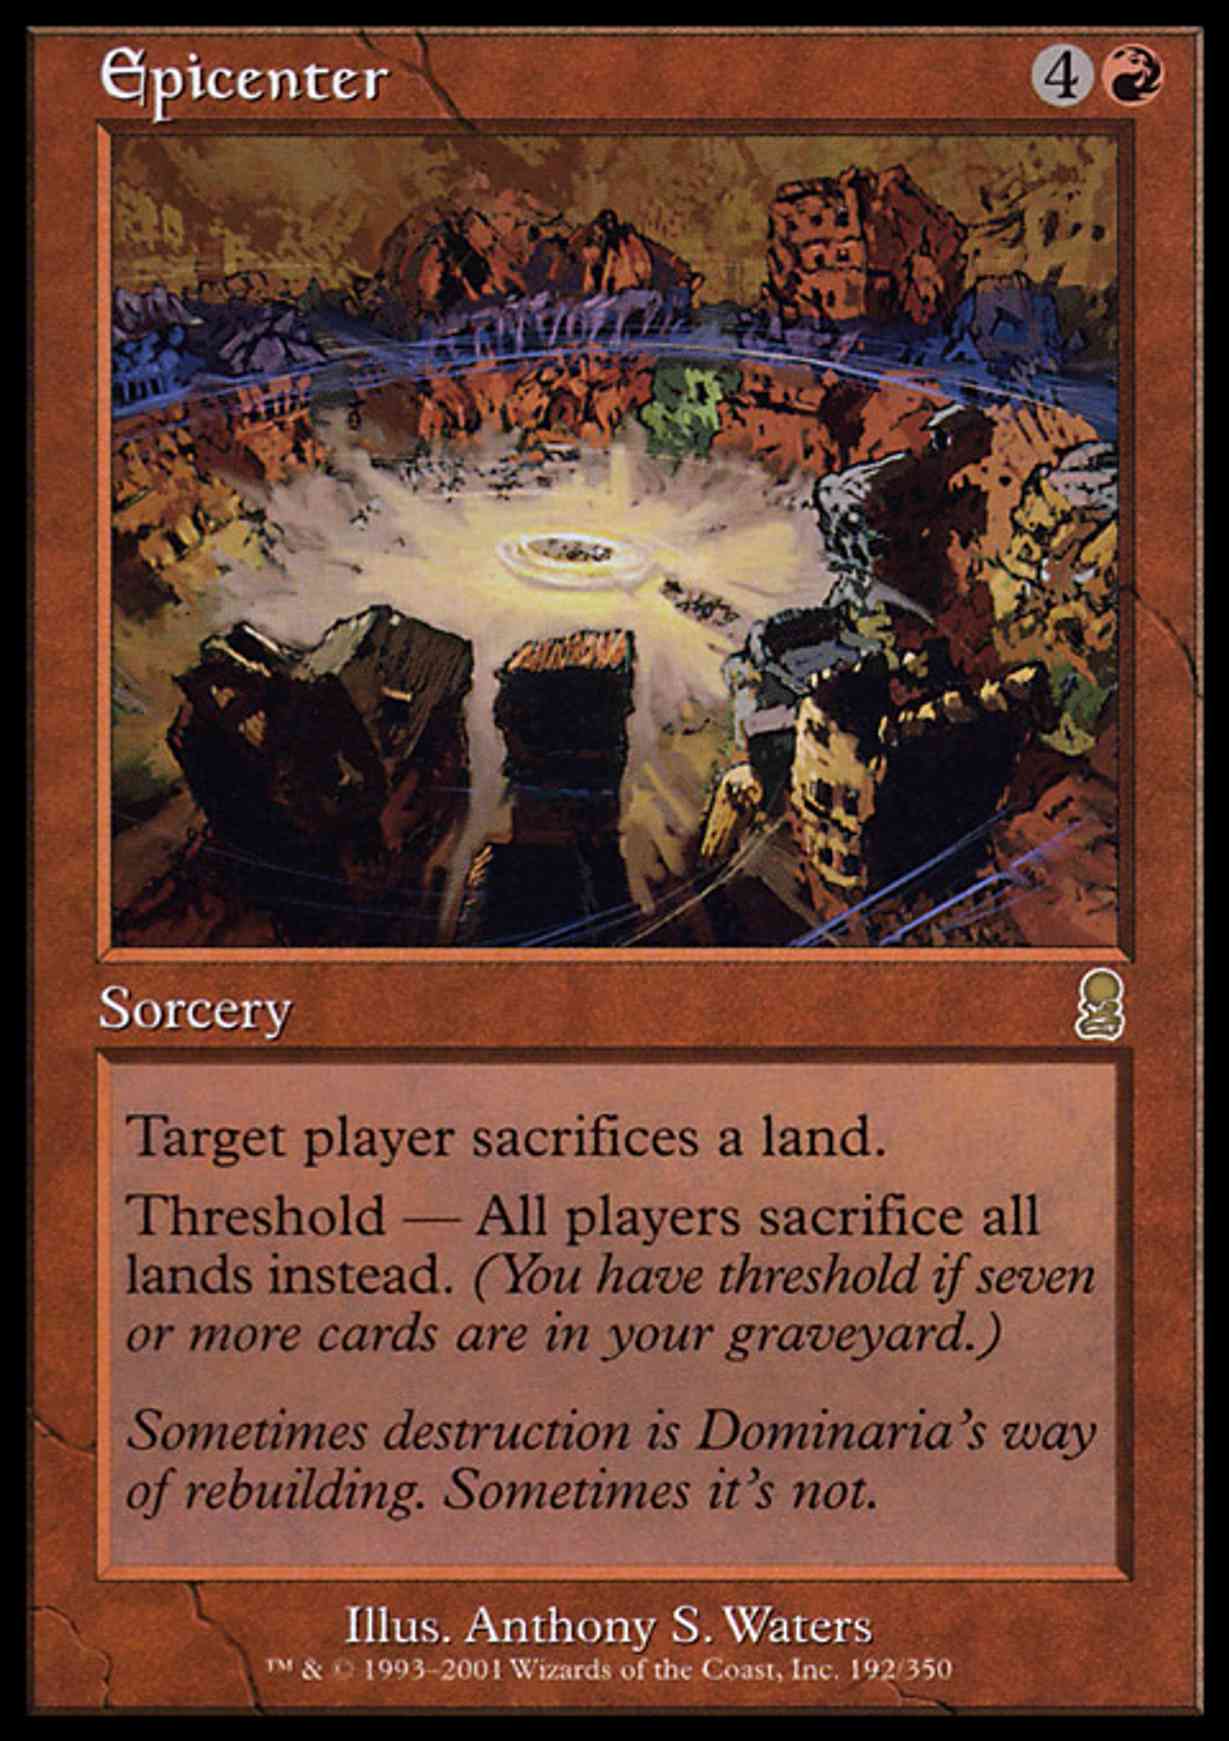 Epicenter magic card front